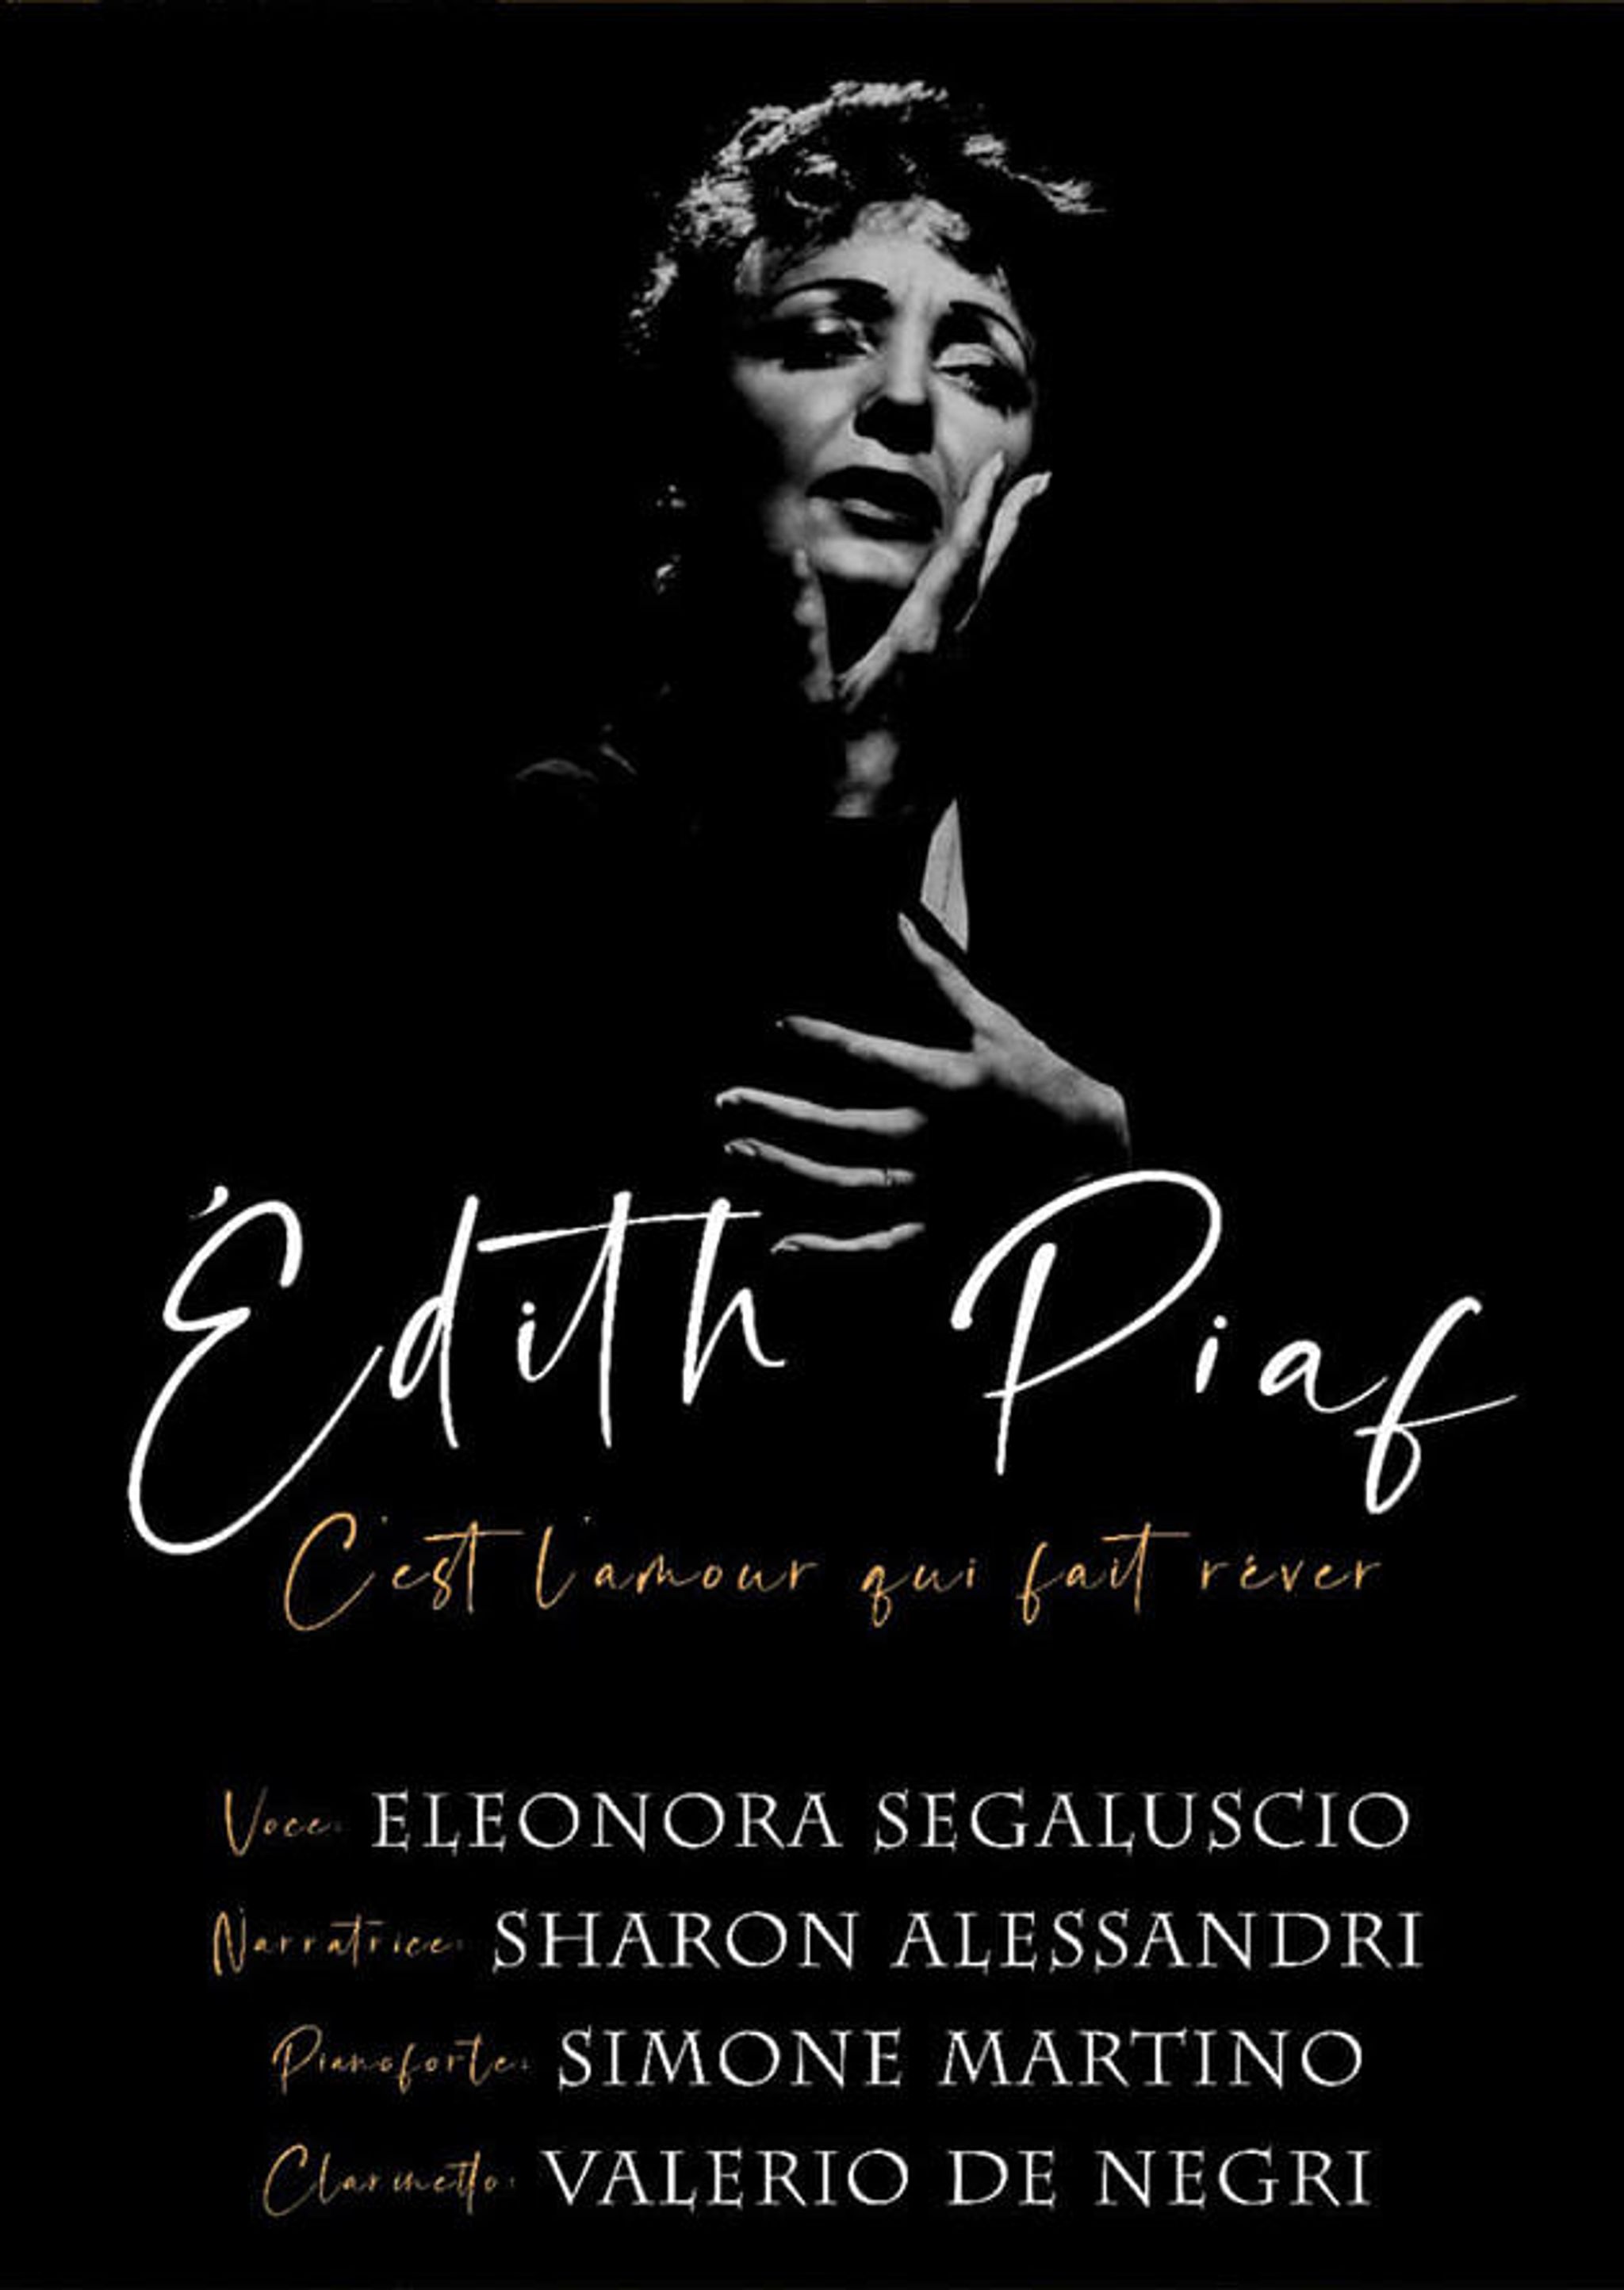 Edith Piaf: The story of a voice